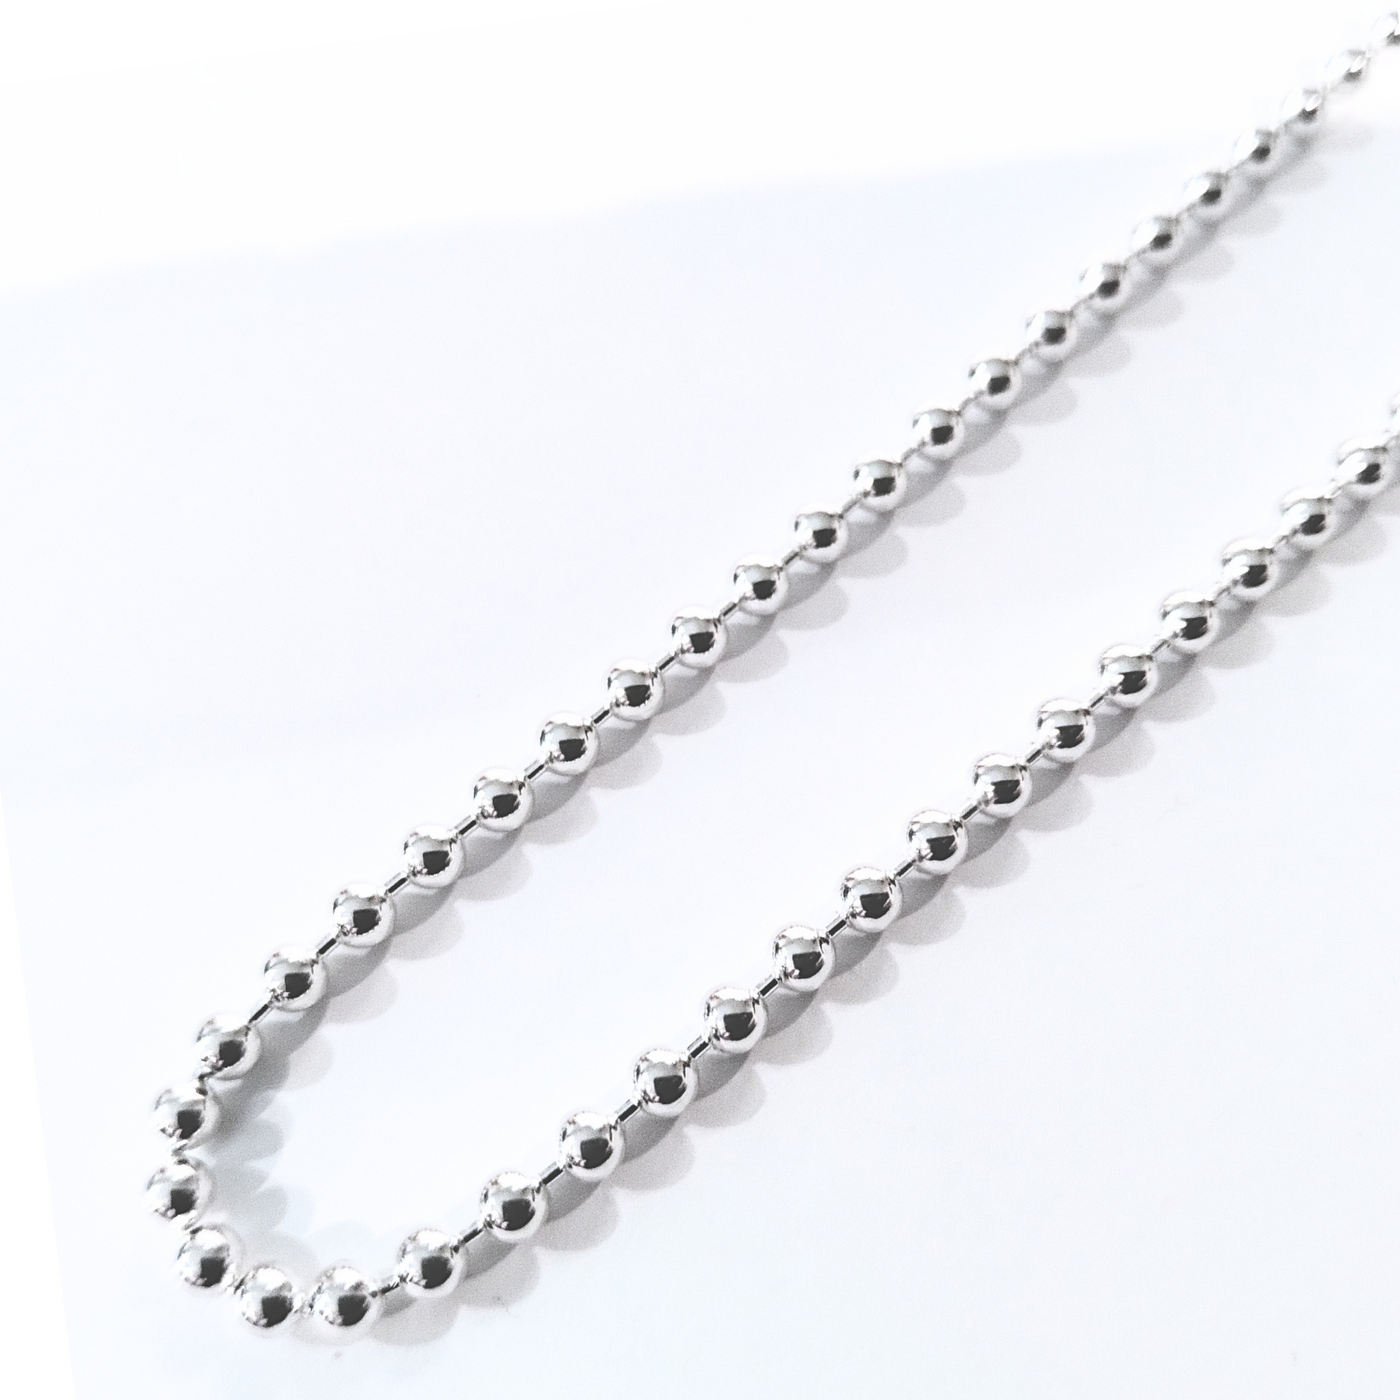 18" 3.0mm Bead Chain (Sterling Silver)